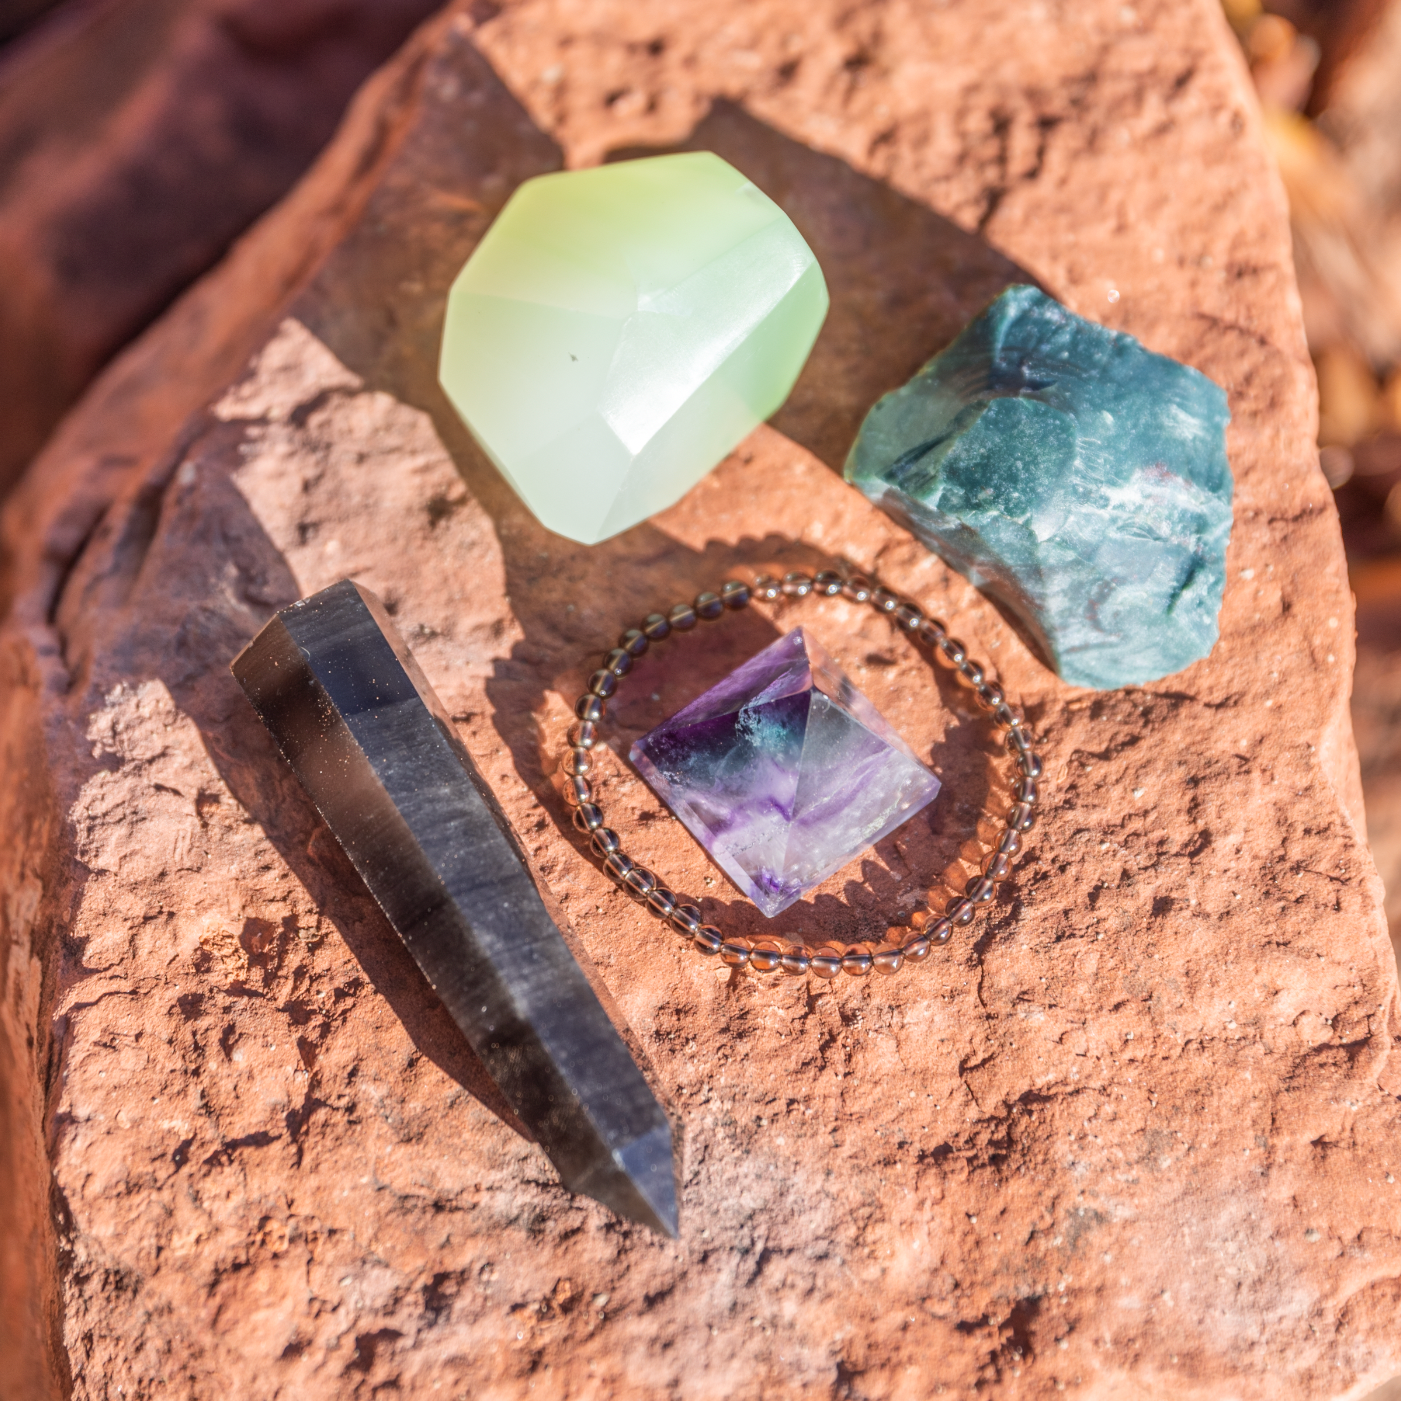 healing crystals: a bundle of crystals used for physical health in sedona, arizona